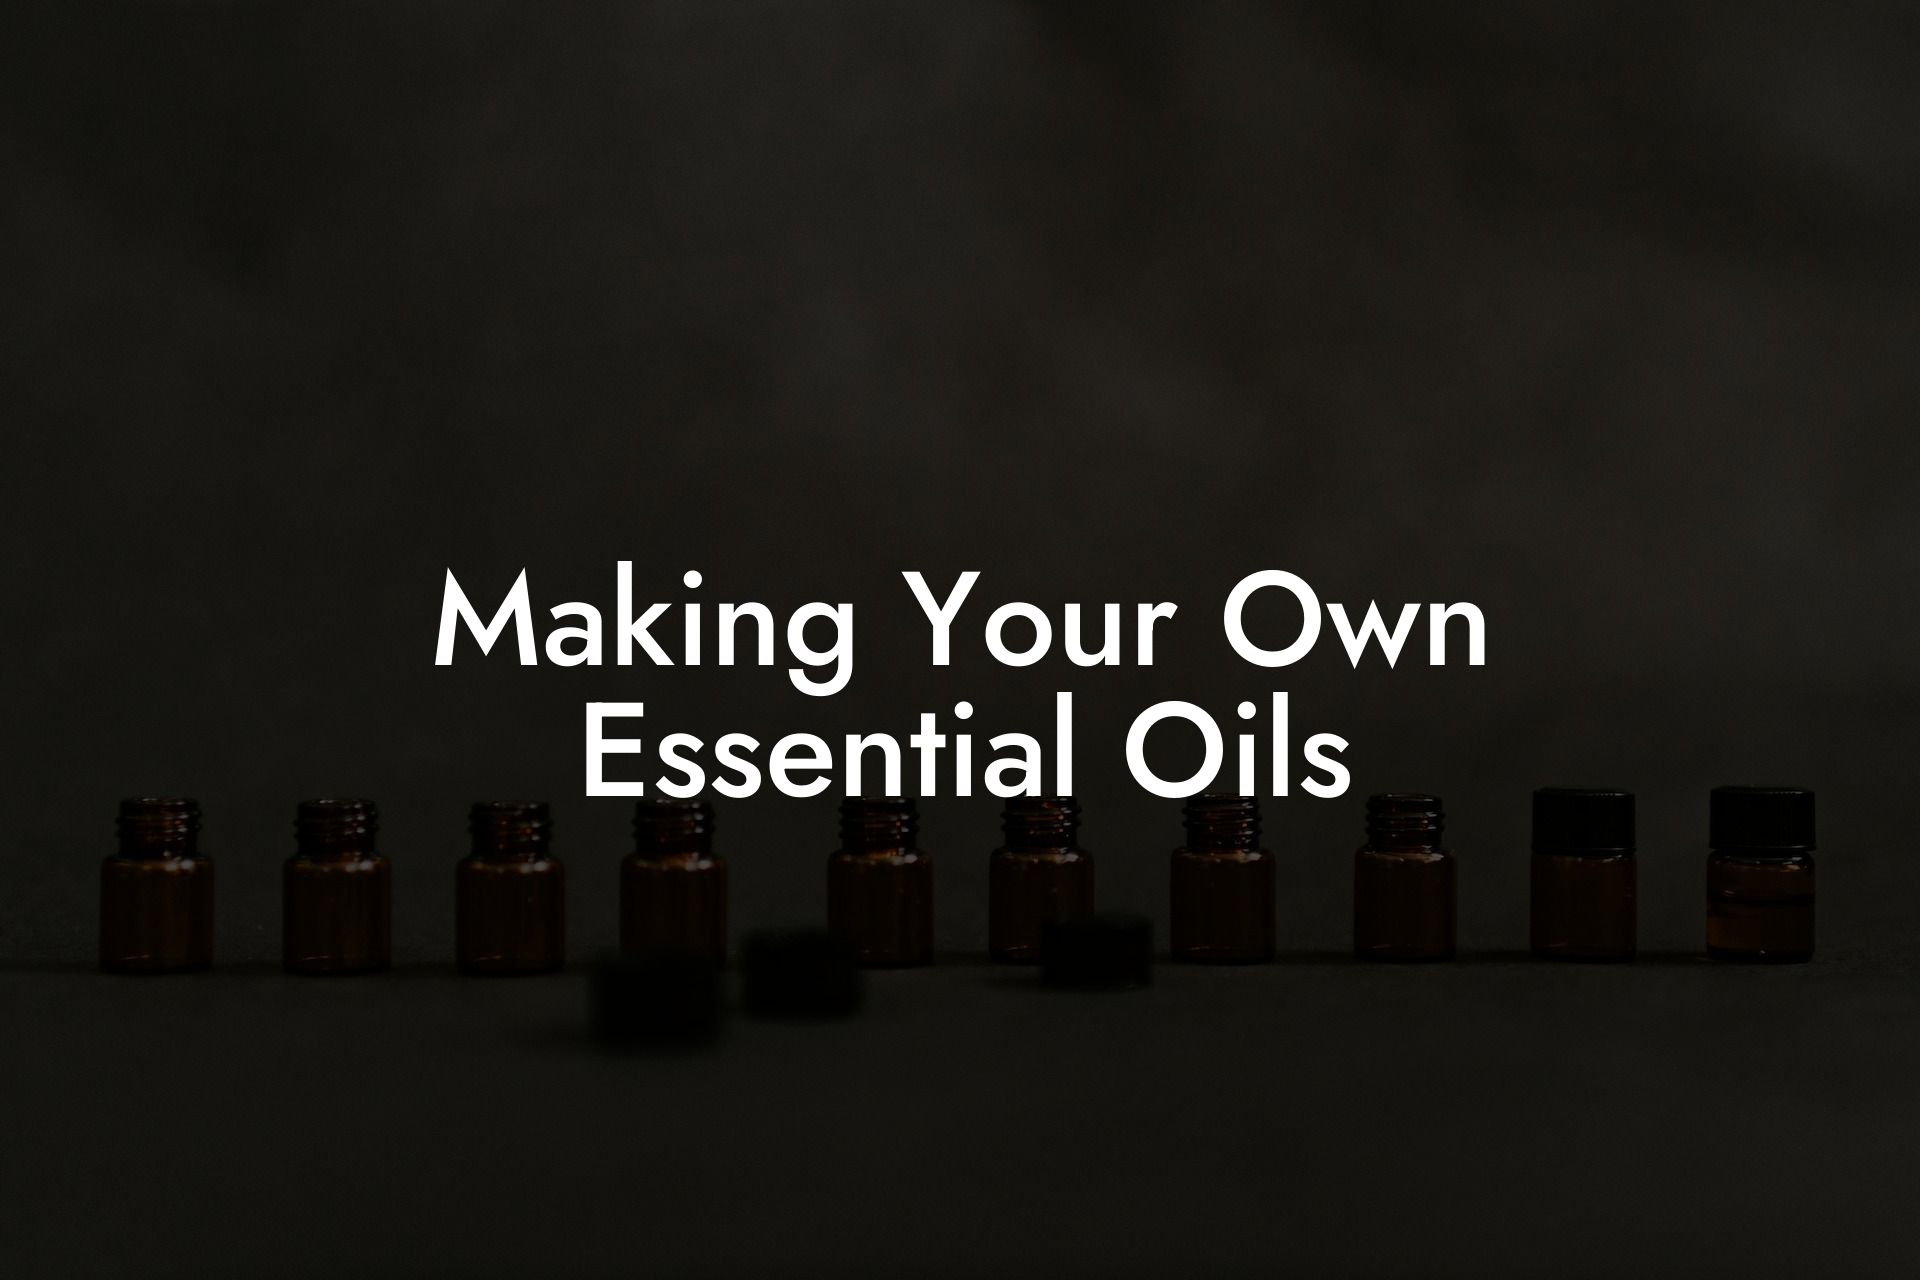 Making Your Own Essential Oils